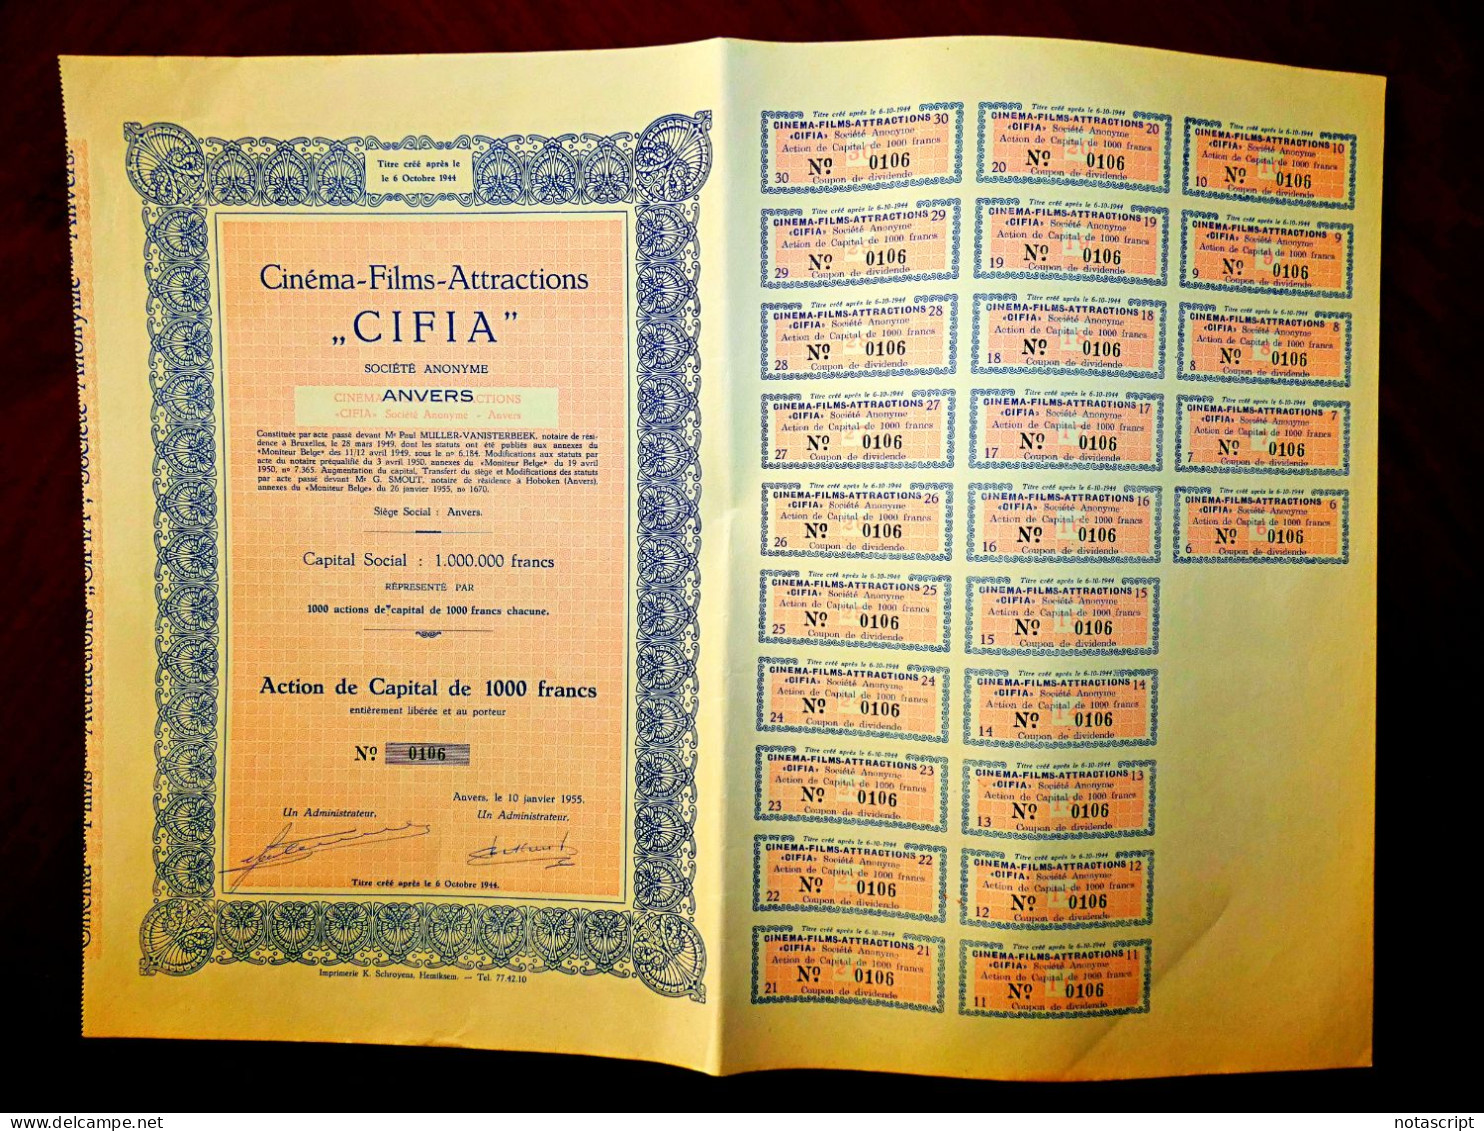 Cinéma Films Attractions CIFIA, Anvers 1955 Belgium  Sharecertificate - Kino & Theater